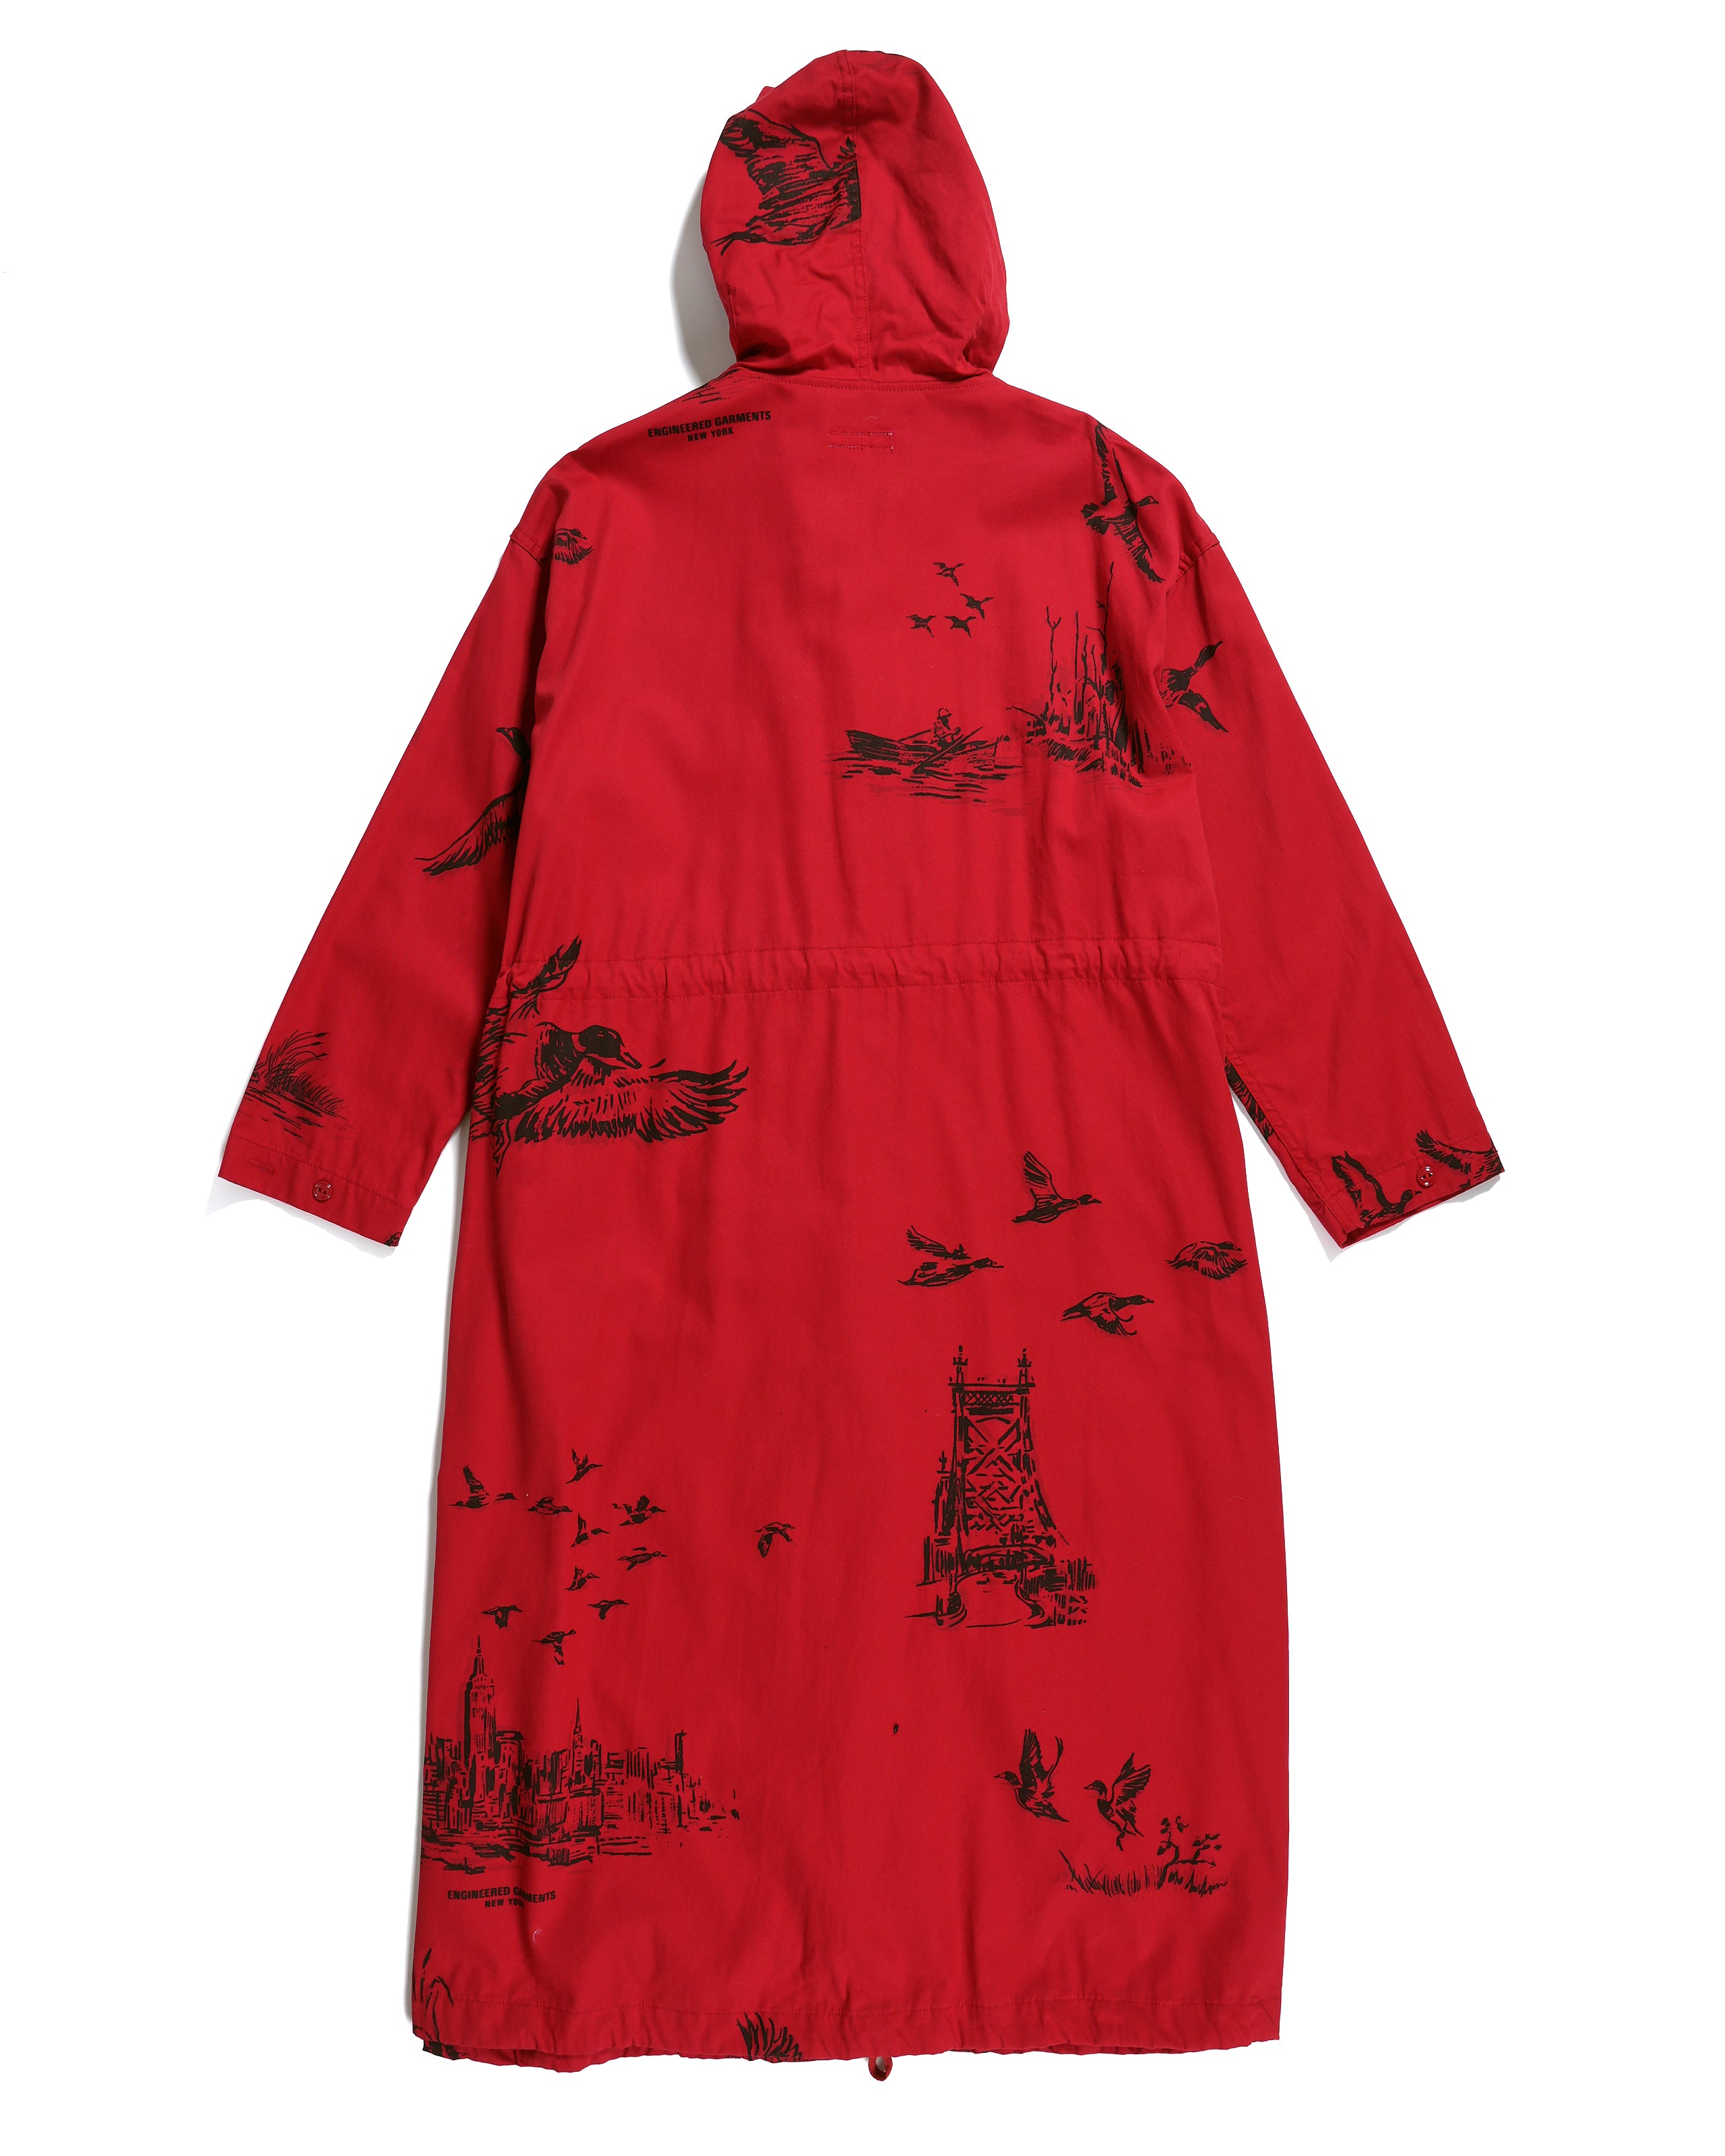 Cagoule Dress - Red Hunting Print French Twill